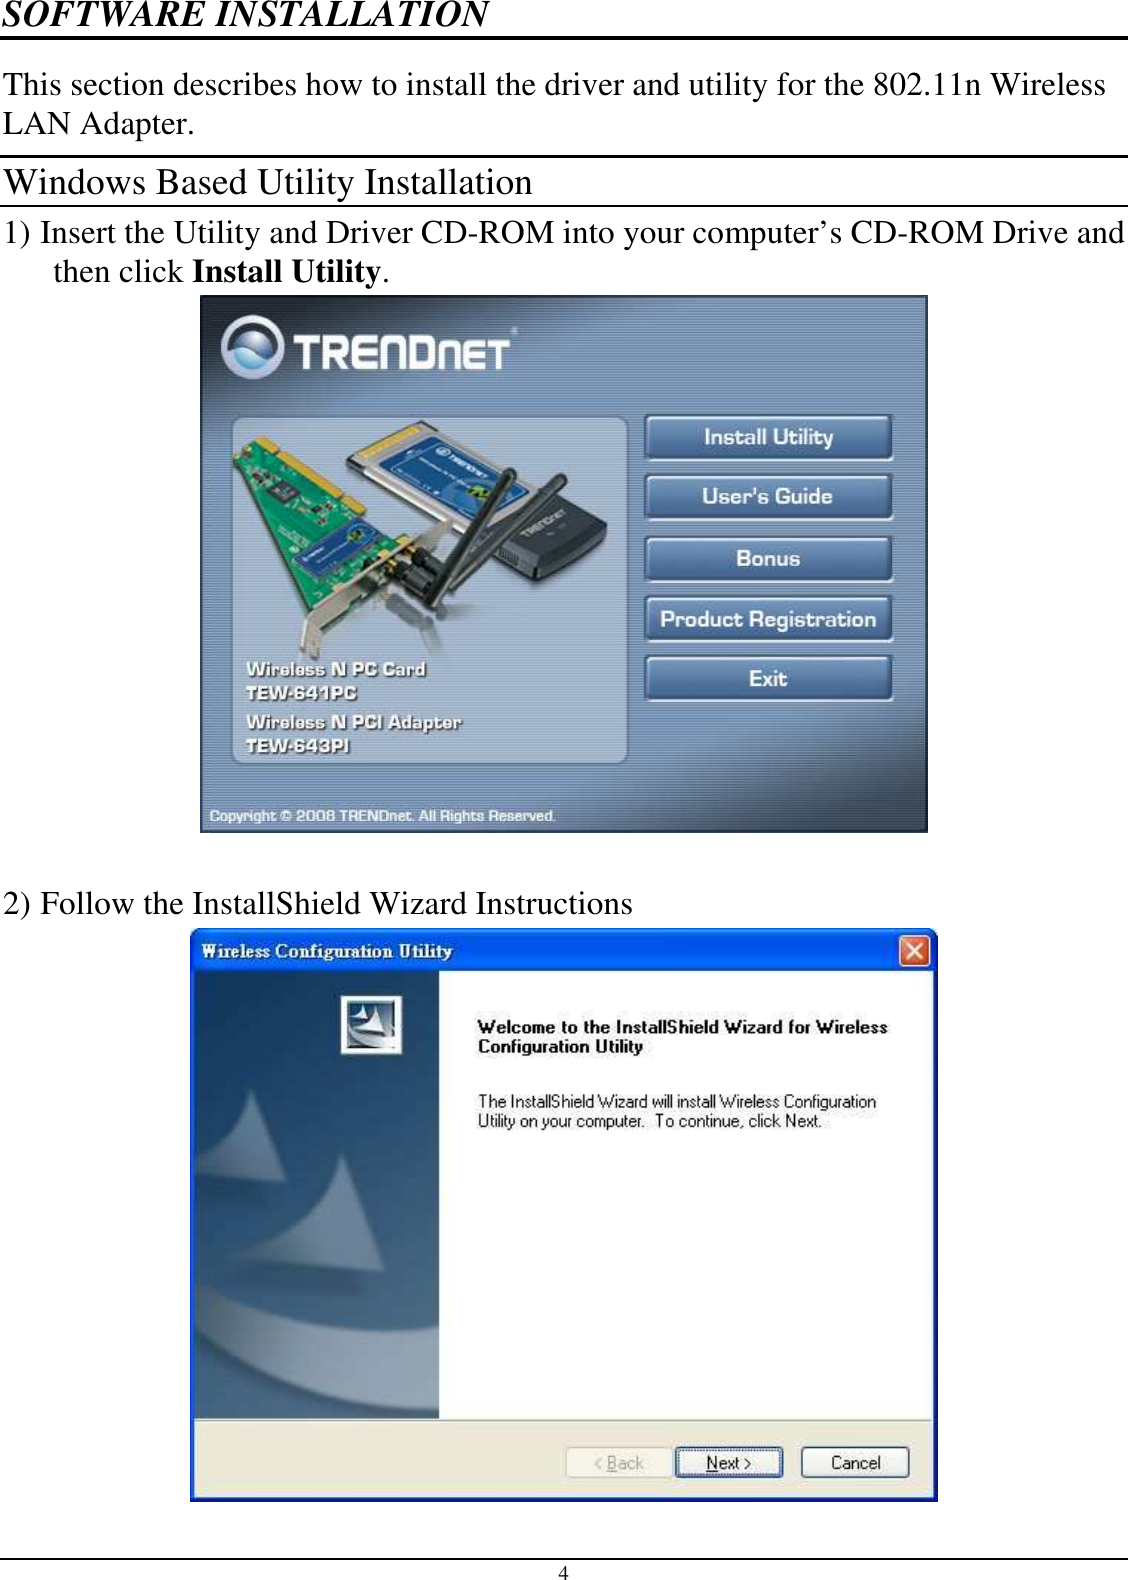 4 SOFTWARE INSTALLATION This section describes how to install the driver and utility for the 802.11n Wireless LAN Adapter. Windows Based Utility Installation 1) Insert the Utility and Driver CD-ROM into your computer’s CD-ROM Drive and then click Install Utility.   2) Follow the InstallShield Wizard Instructions 